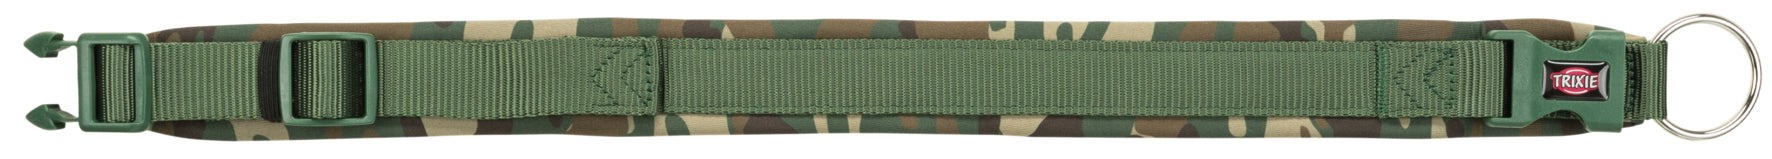 Trixie Premium Collar With Neoprene Padding, Extra Wide - Camouflage/Forest Green